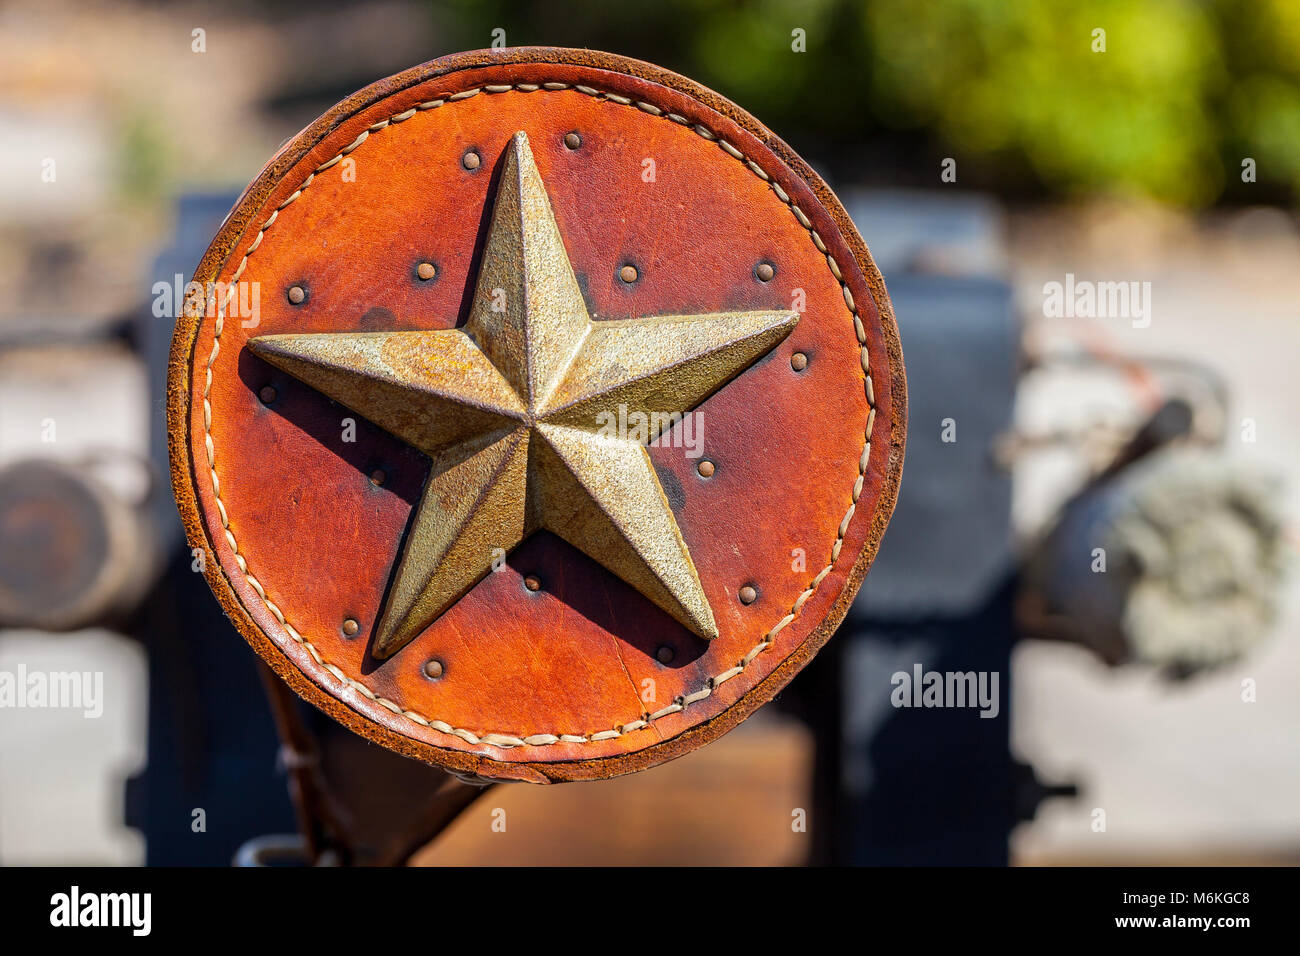 Antique leather ornament decorated with metal Texas star Stock Photo